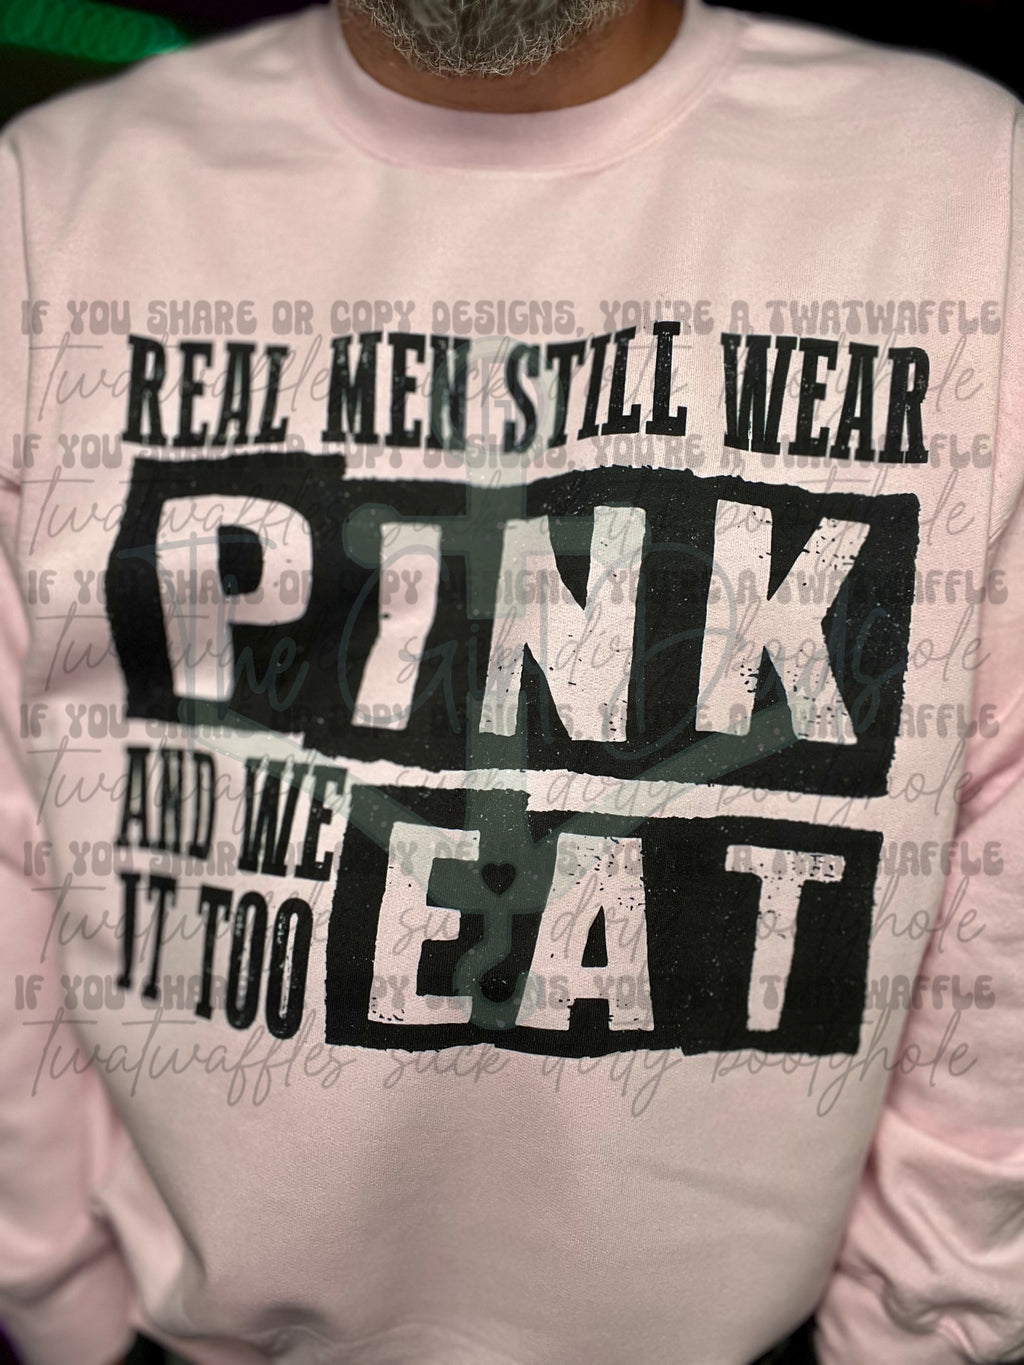 Real Men Still Wear Pink And We Eat It Too Top Design